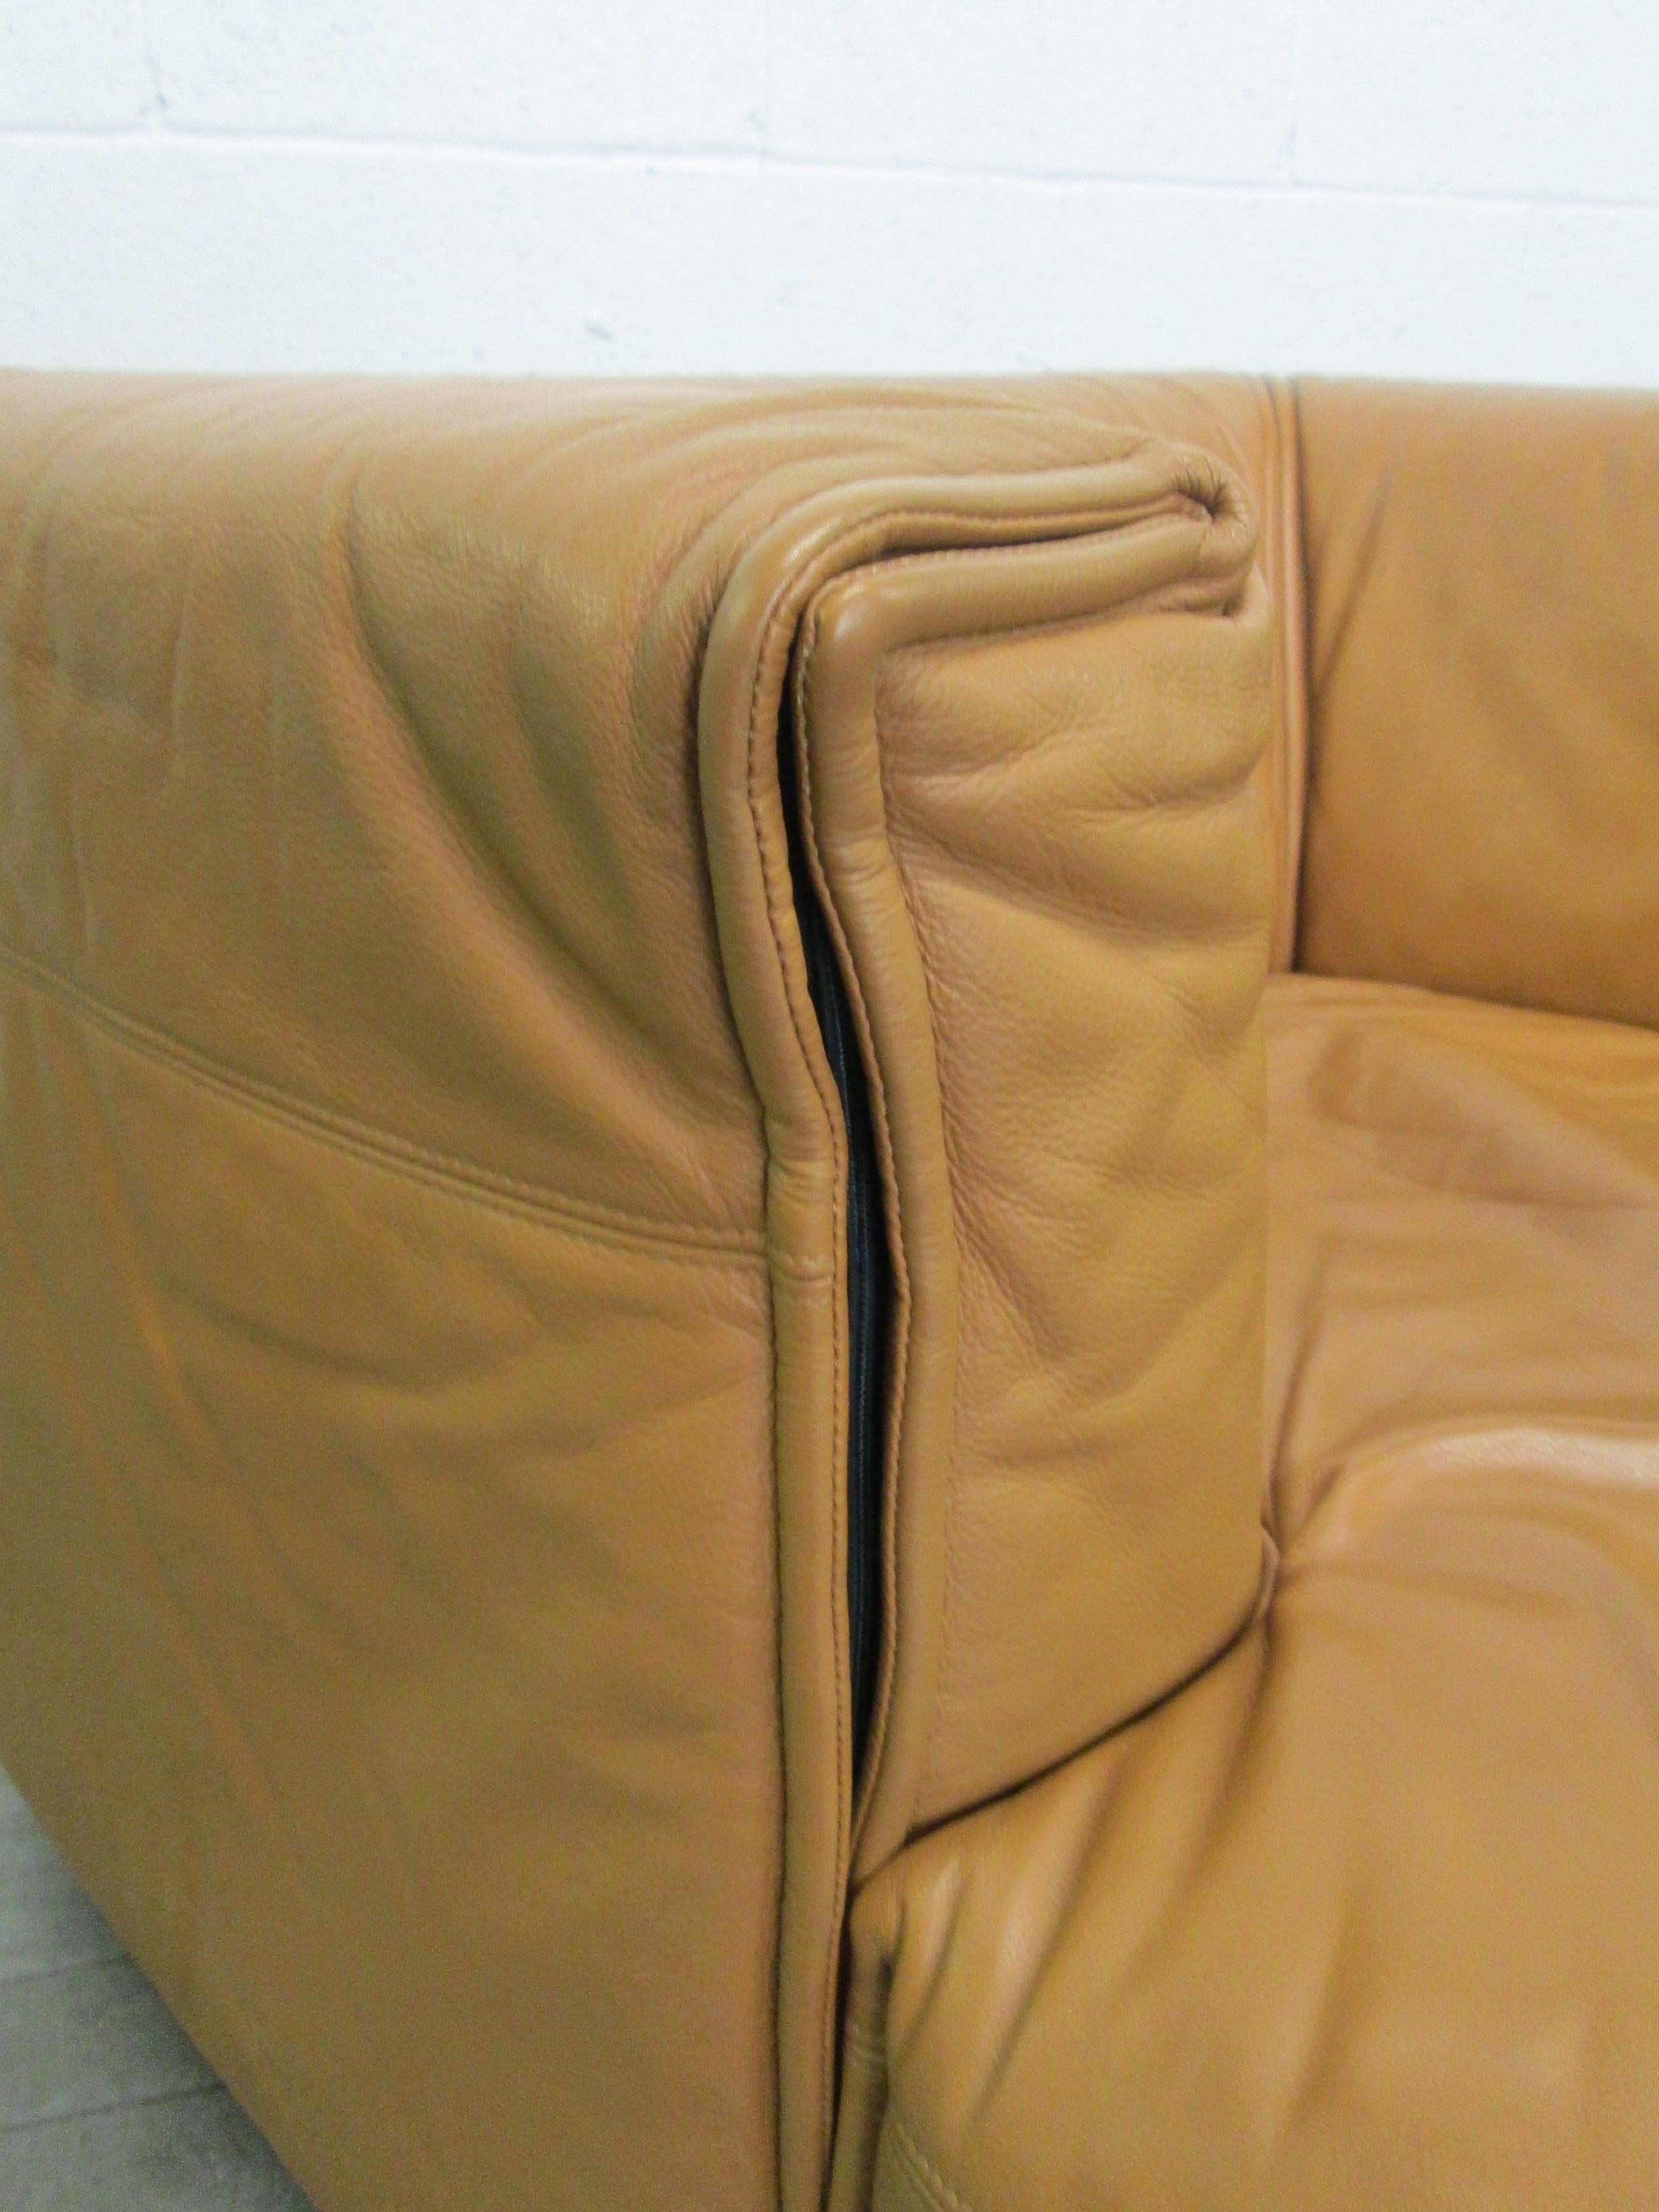 Unique Italian Leather Lounge Chair DeSede Style In Good Condition For Sale In New York, NY